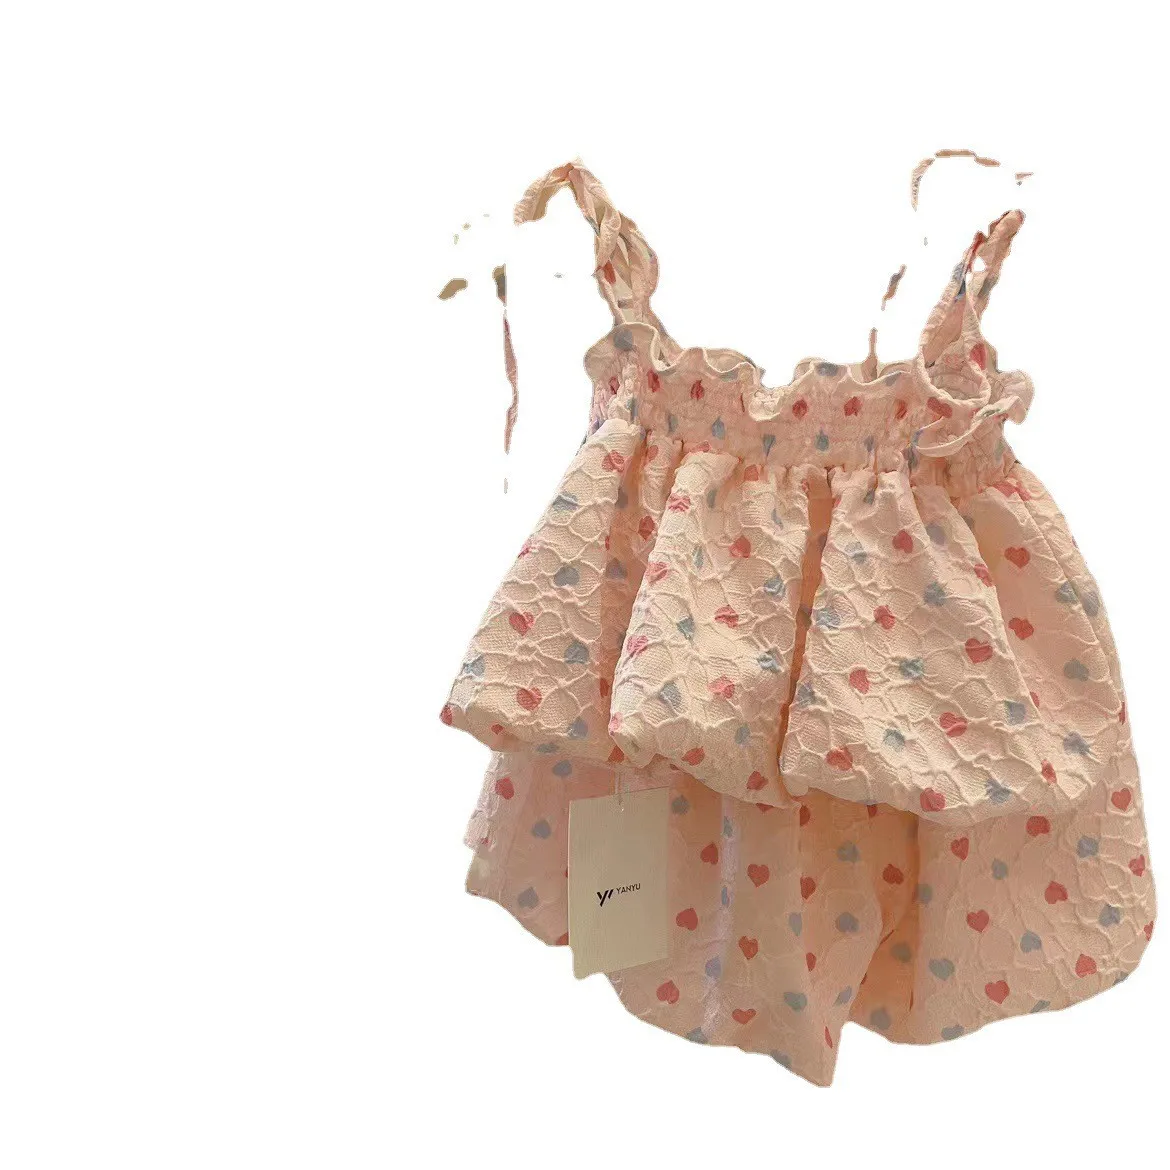 2023 Girls' new love sweet suspender suit polka dot top shorts two-piece baby girl set